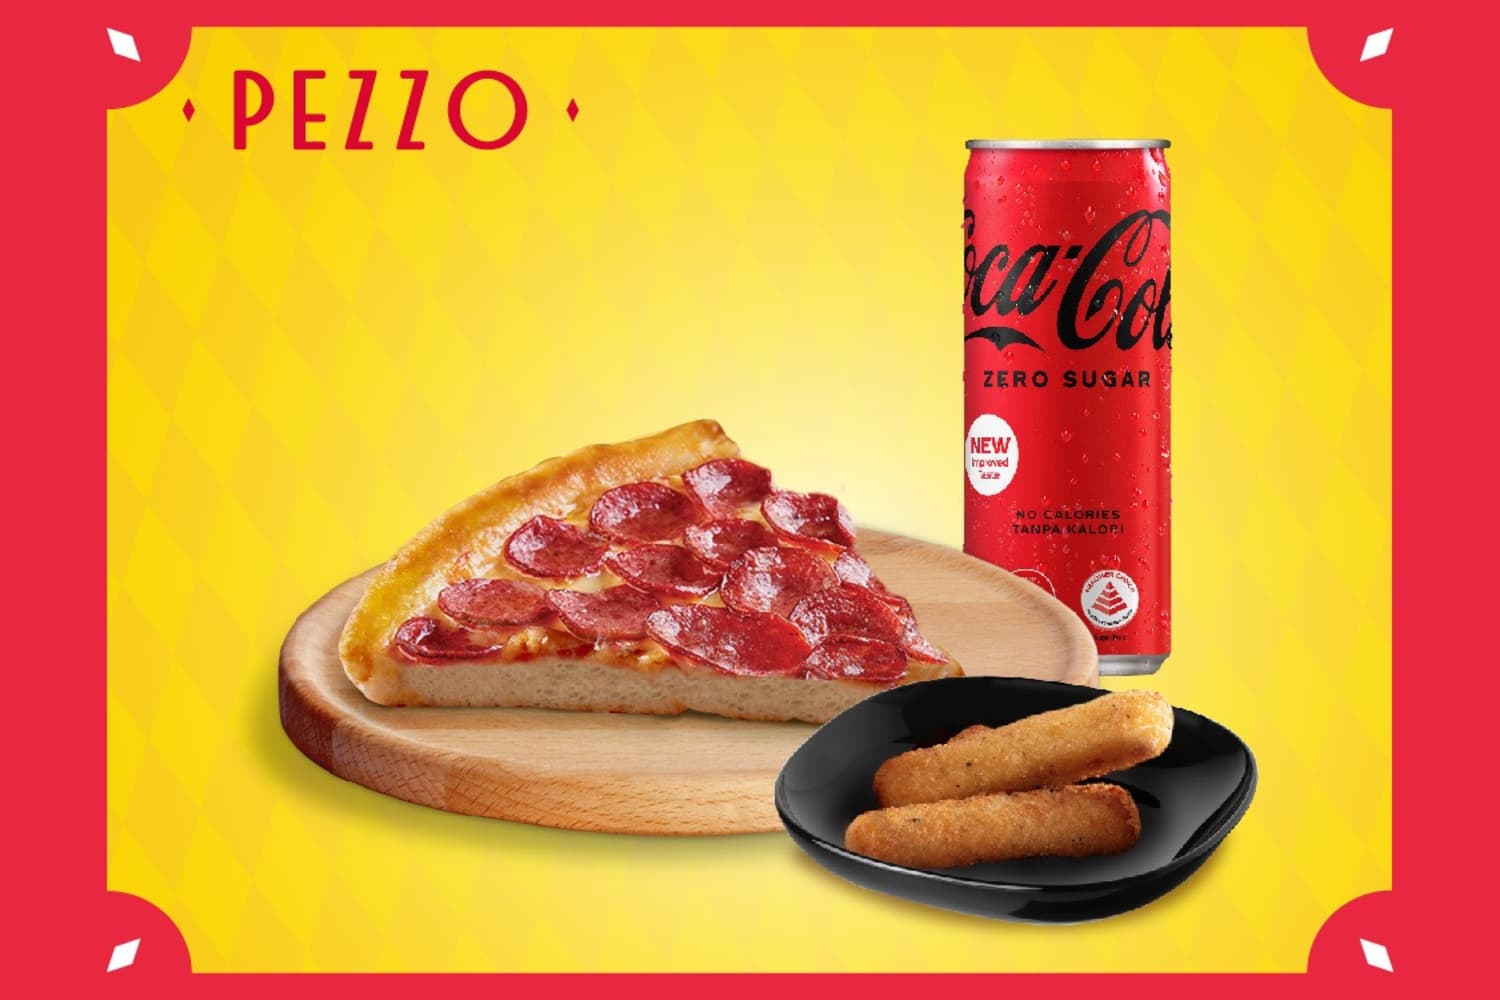 1 x Classic Slice Pizza + 2 x Cheese Sticks + 1 x Can of Coca-Cola Zero Sugar - exclusive deal at Pezzo - Get Deals, Cashback and Rewards with ShopBack GO